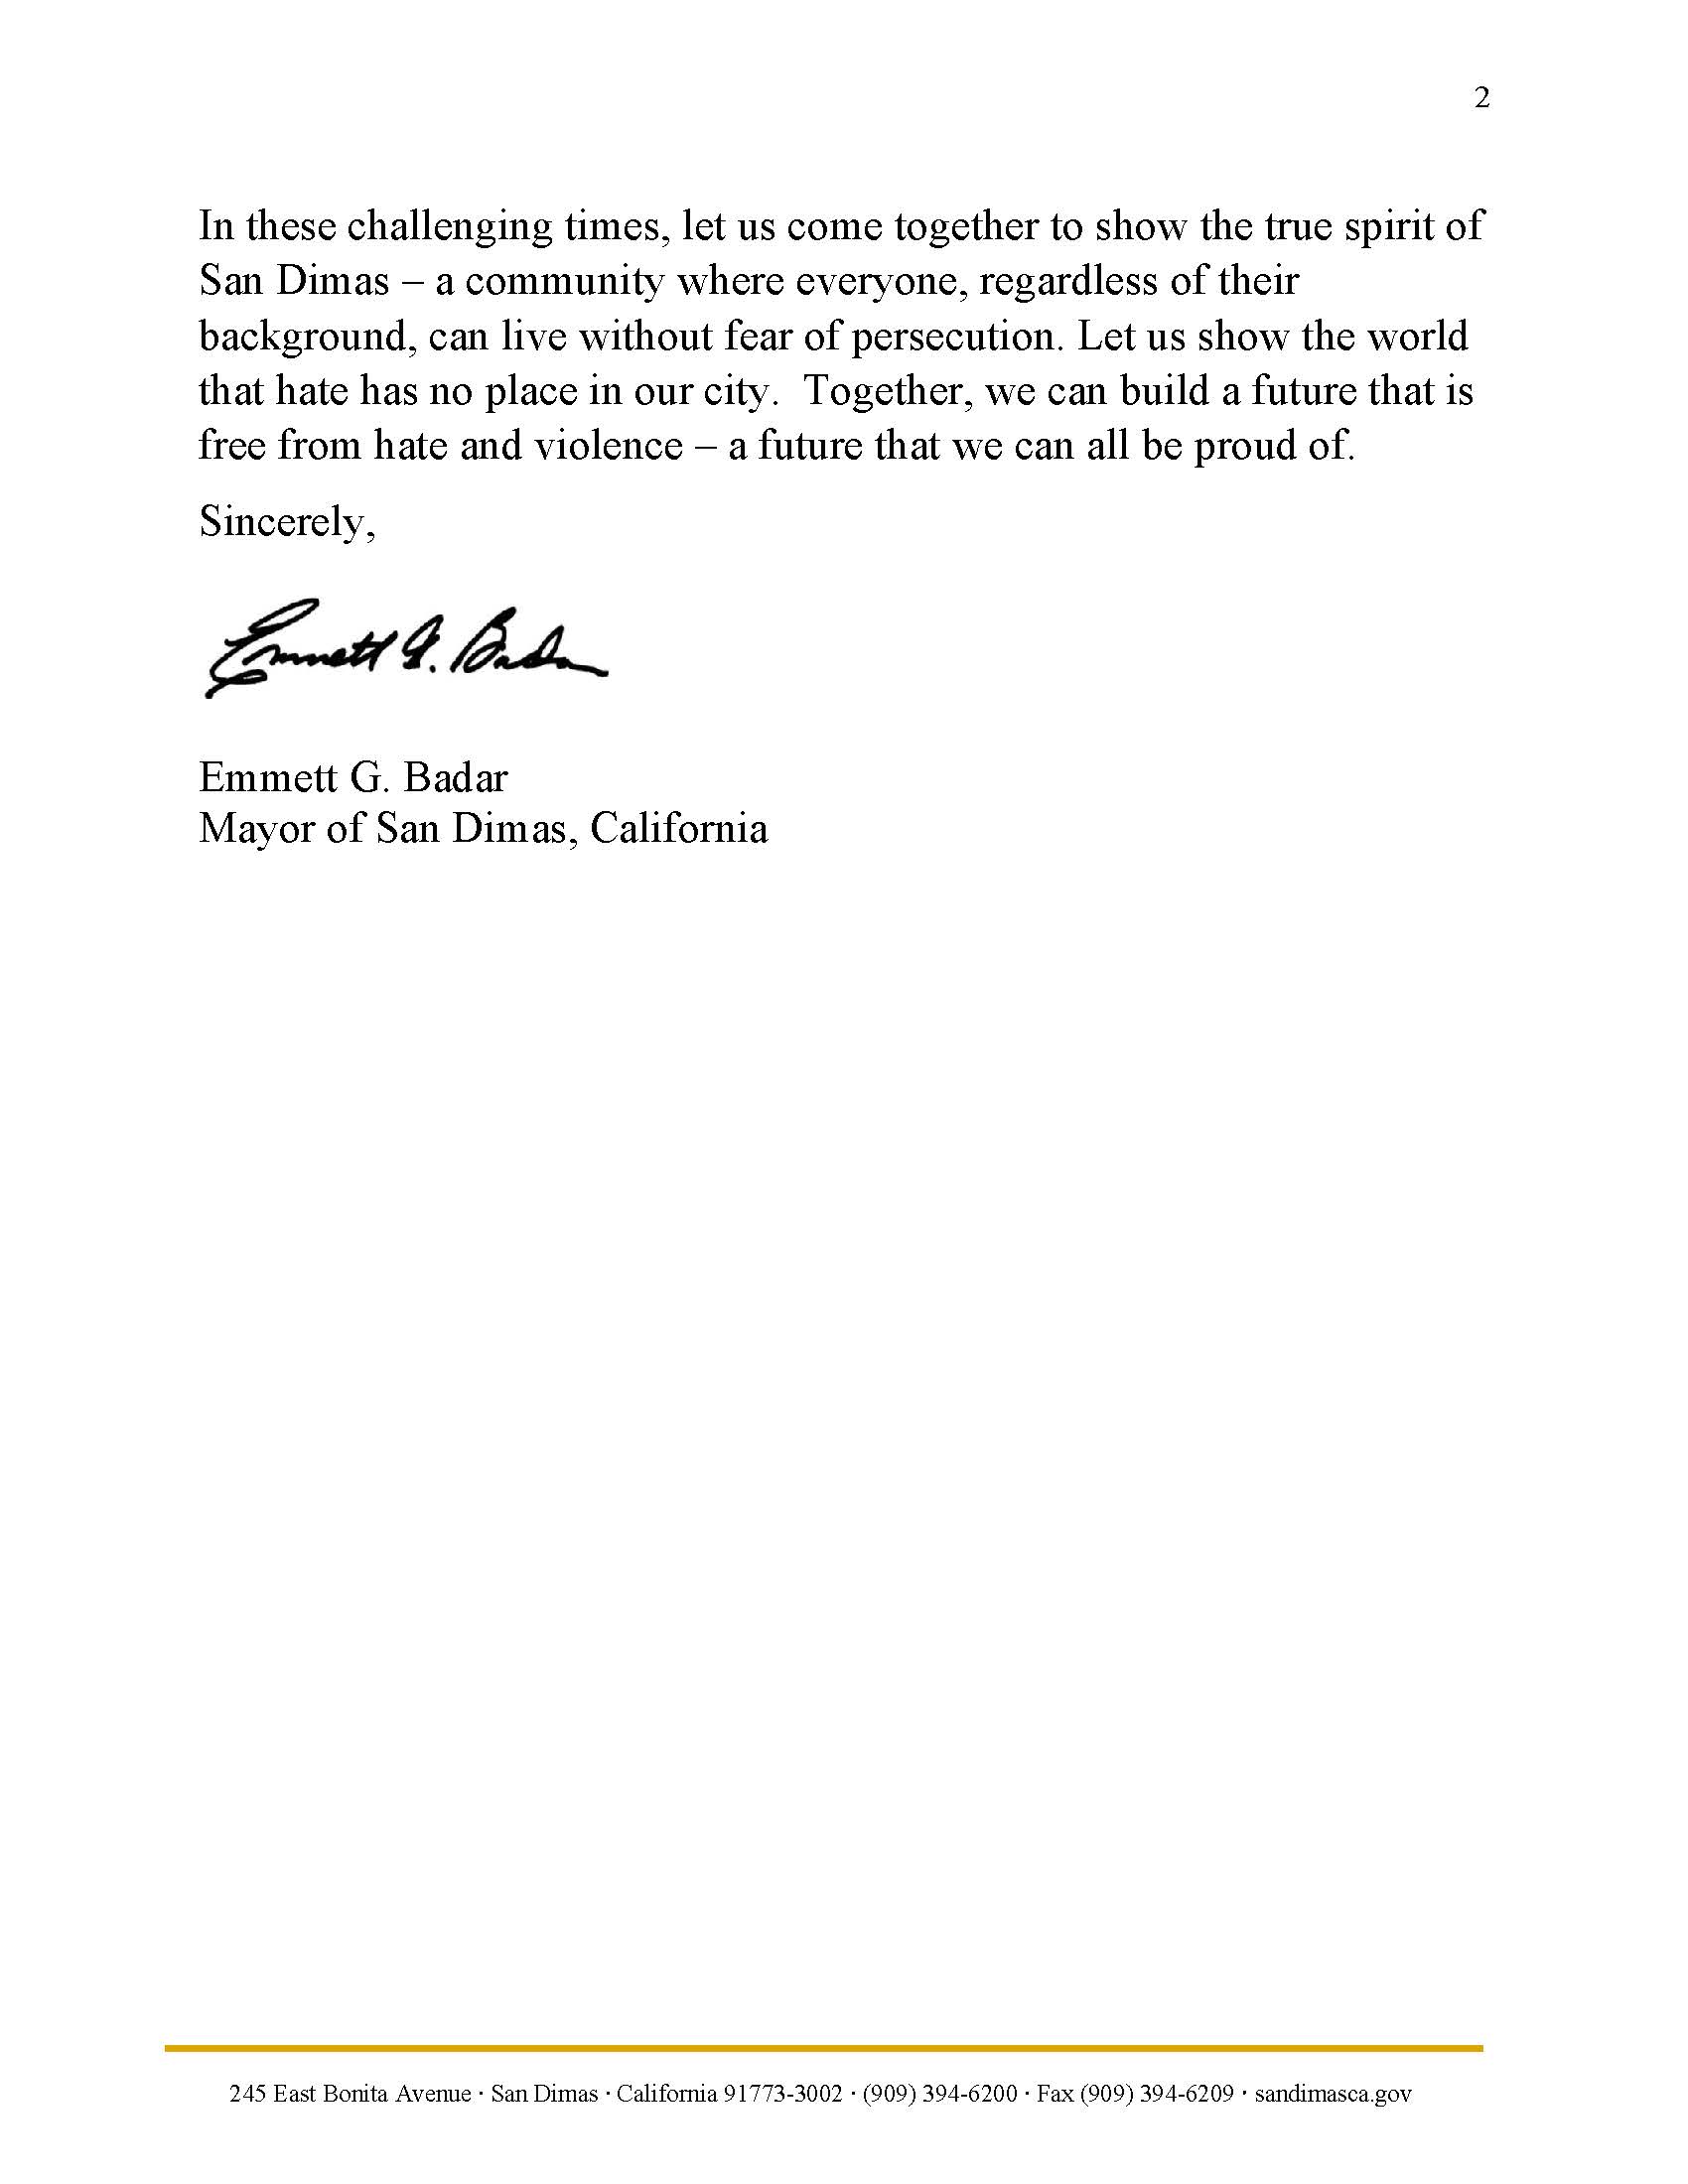 Open Letter to San Dimas Community from Mayor Badar - 11.15.23_Page_2